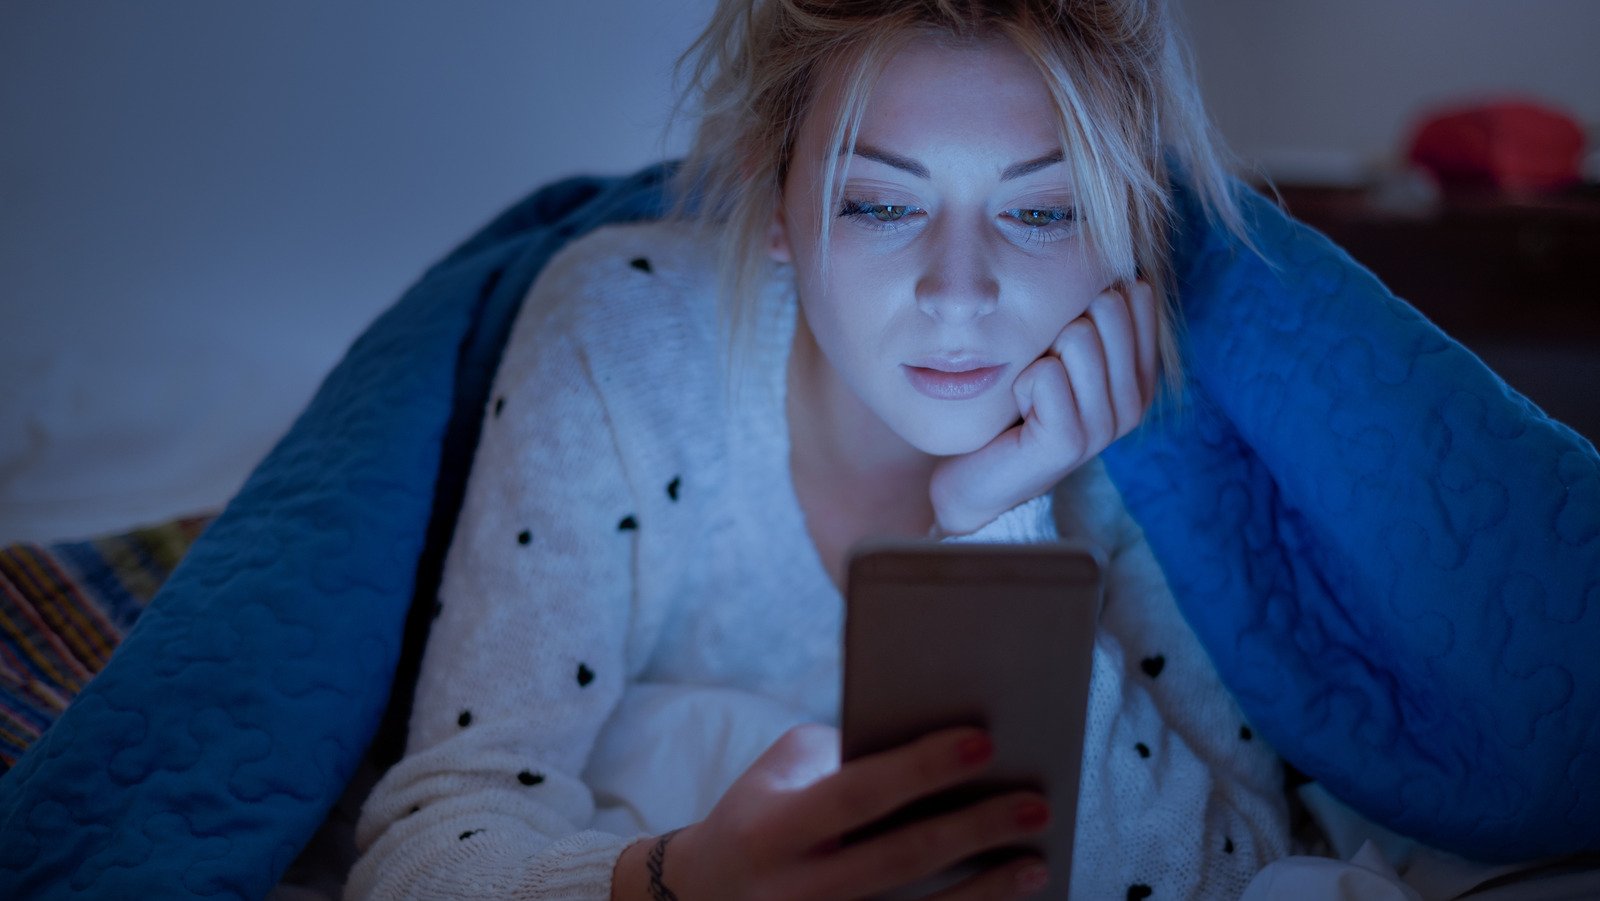 Is It Safe To Sleep With Your Phone In Your Bed?